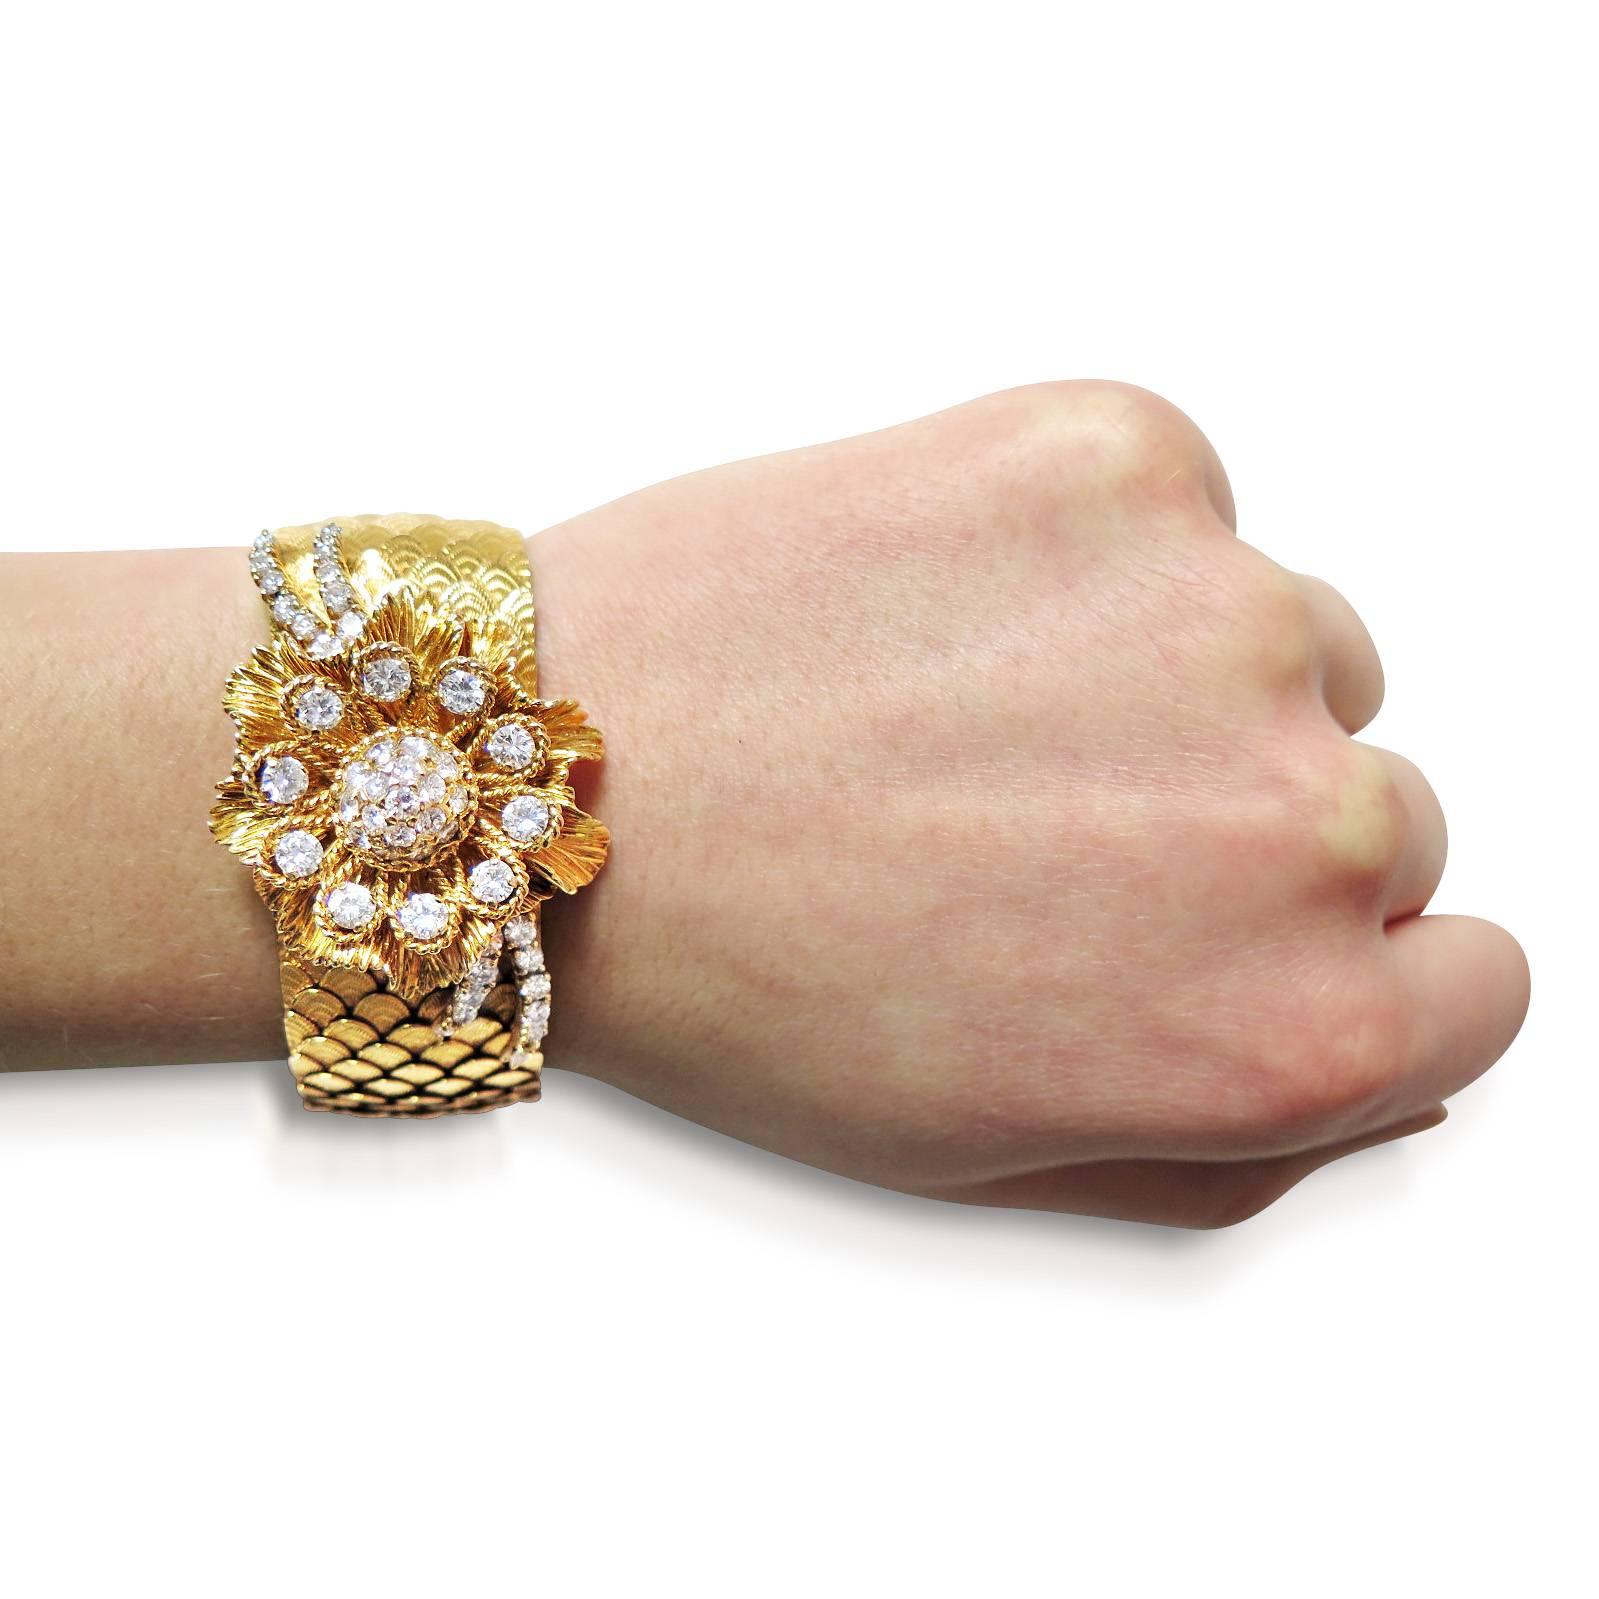 Kutchinsky Diamond Gold Scalloped Floral Bracelet In Excellent Condition For Sale In London, GB